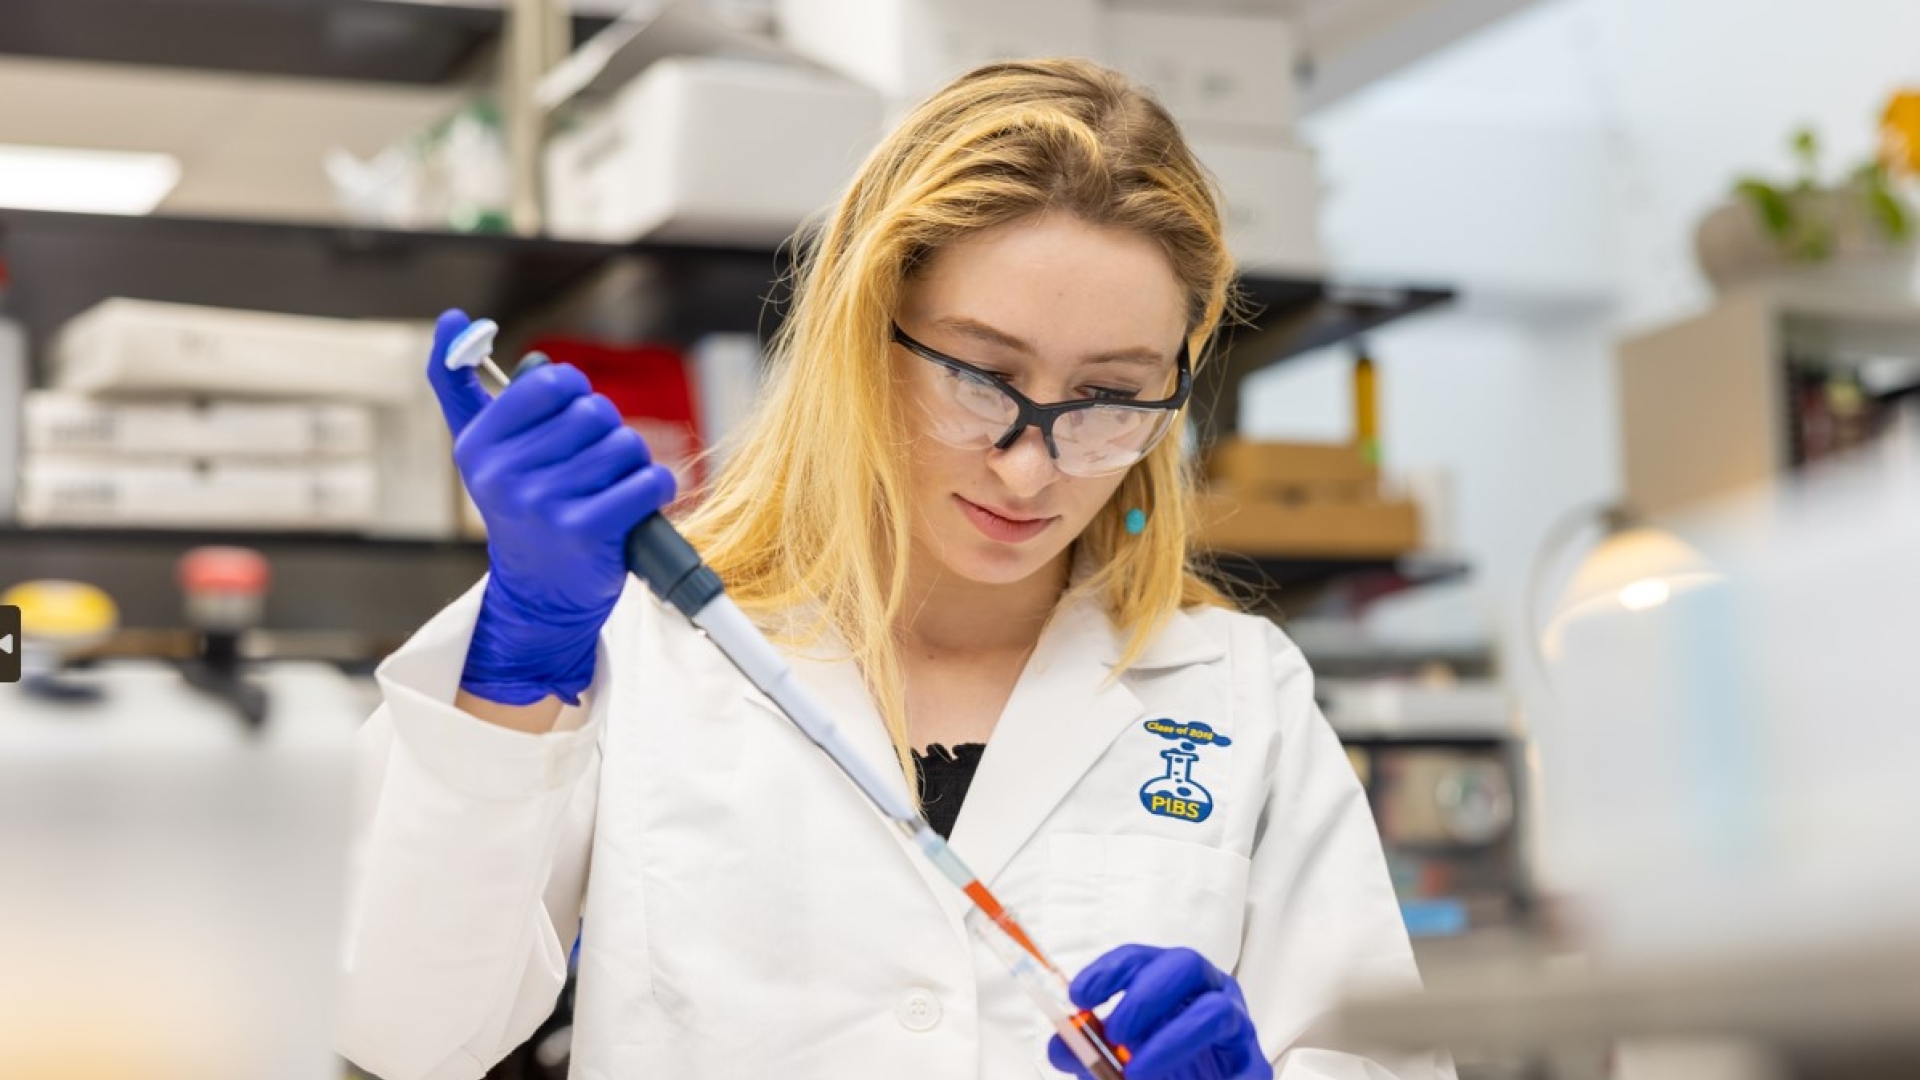 A Pharmacology researcher studies a chemical in the Traynor Lab